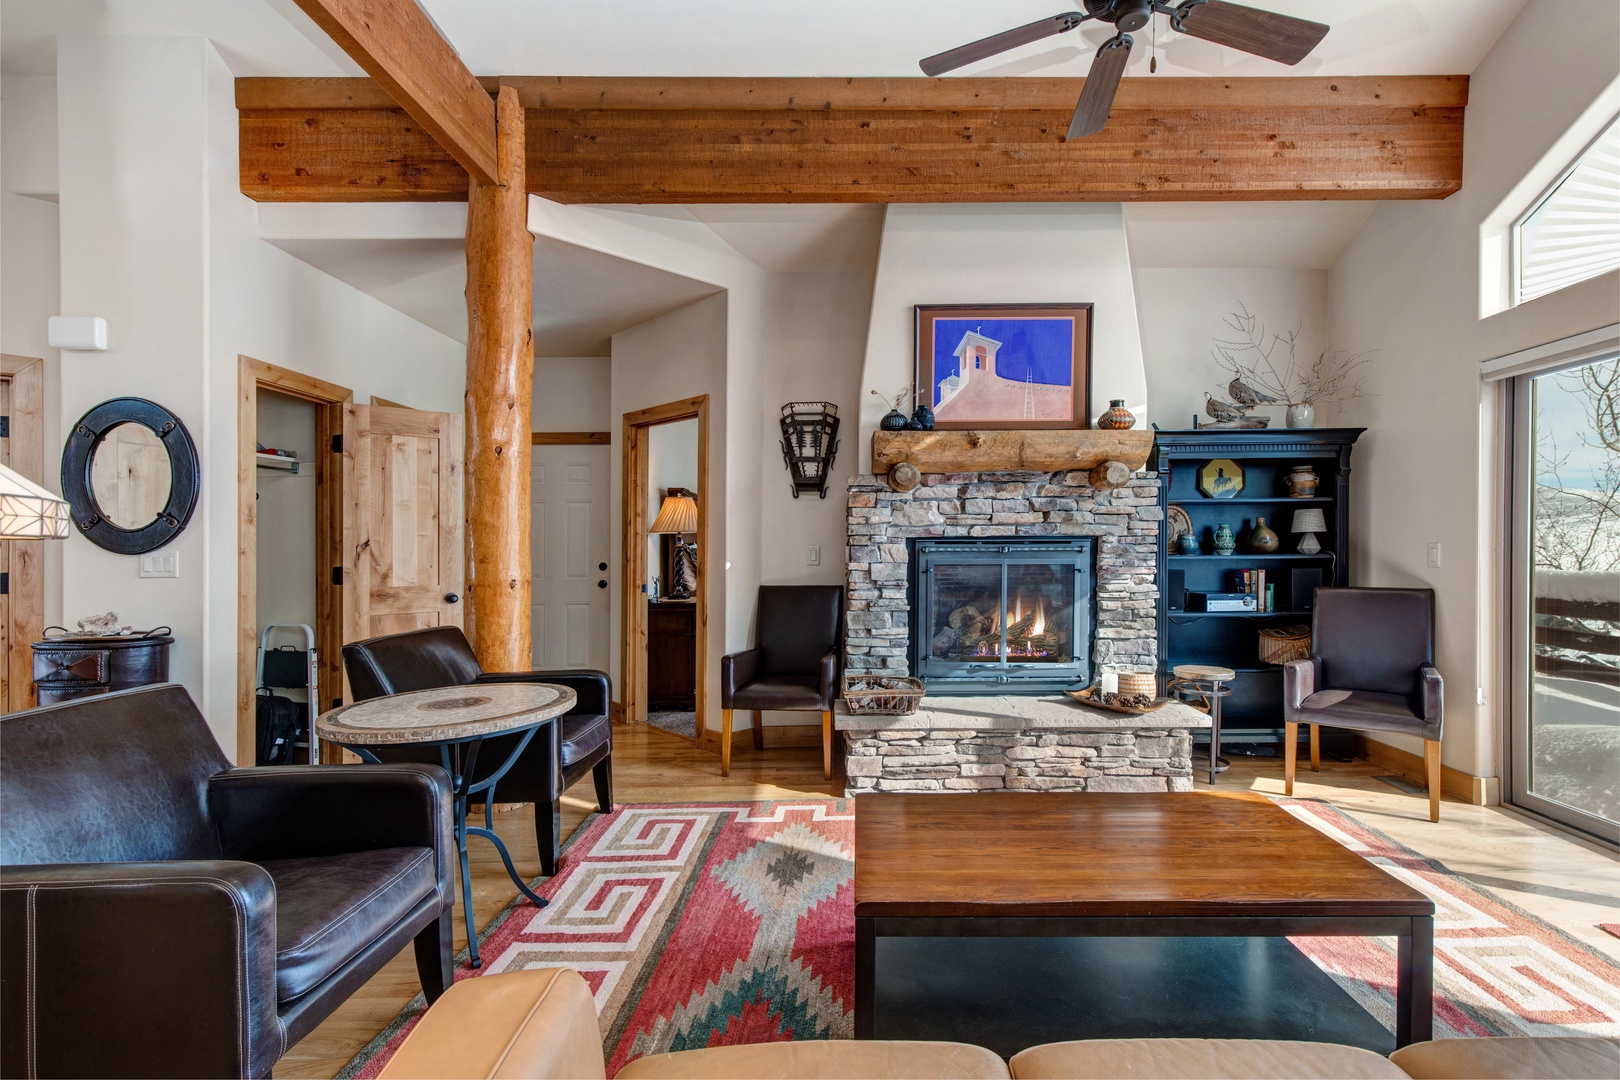 Park City Vacation Rentals, Cedar Ridge Townhouse - Fireplace and cozy decor will make you never want to leave the house